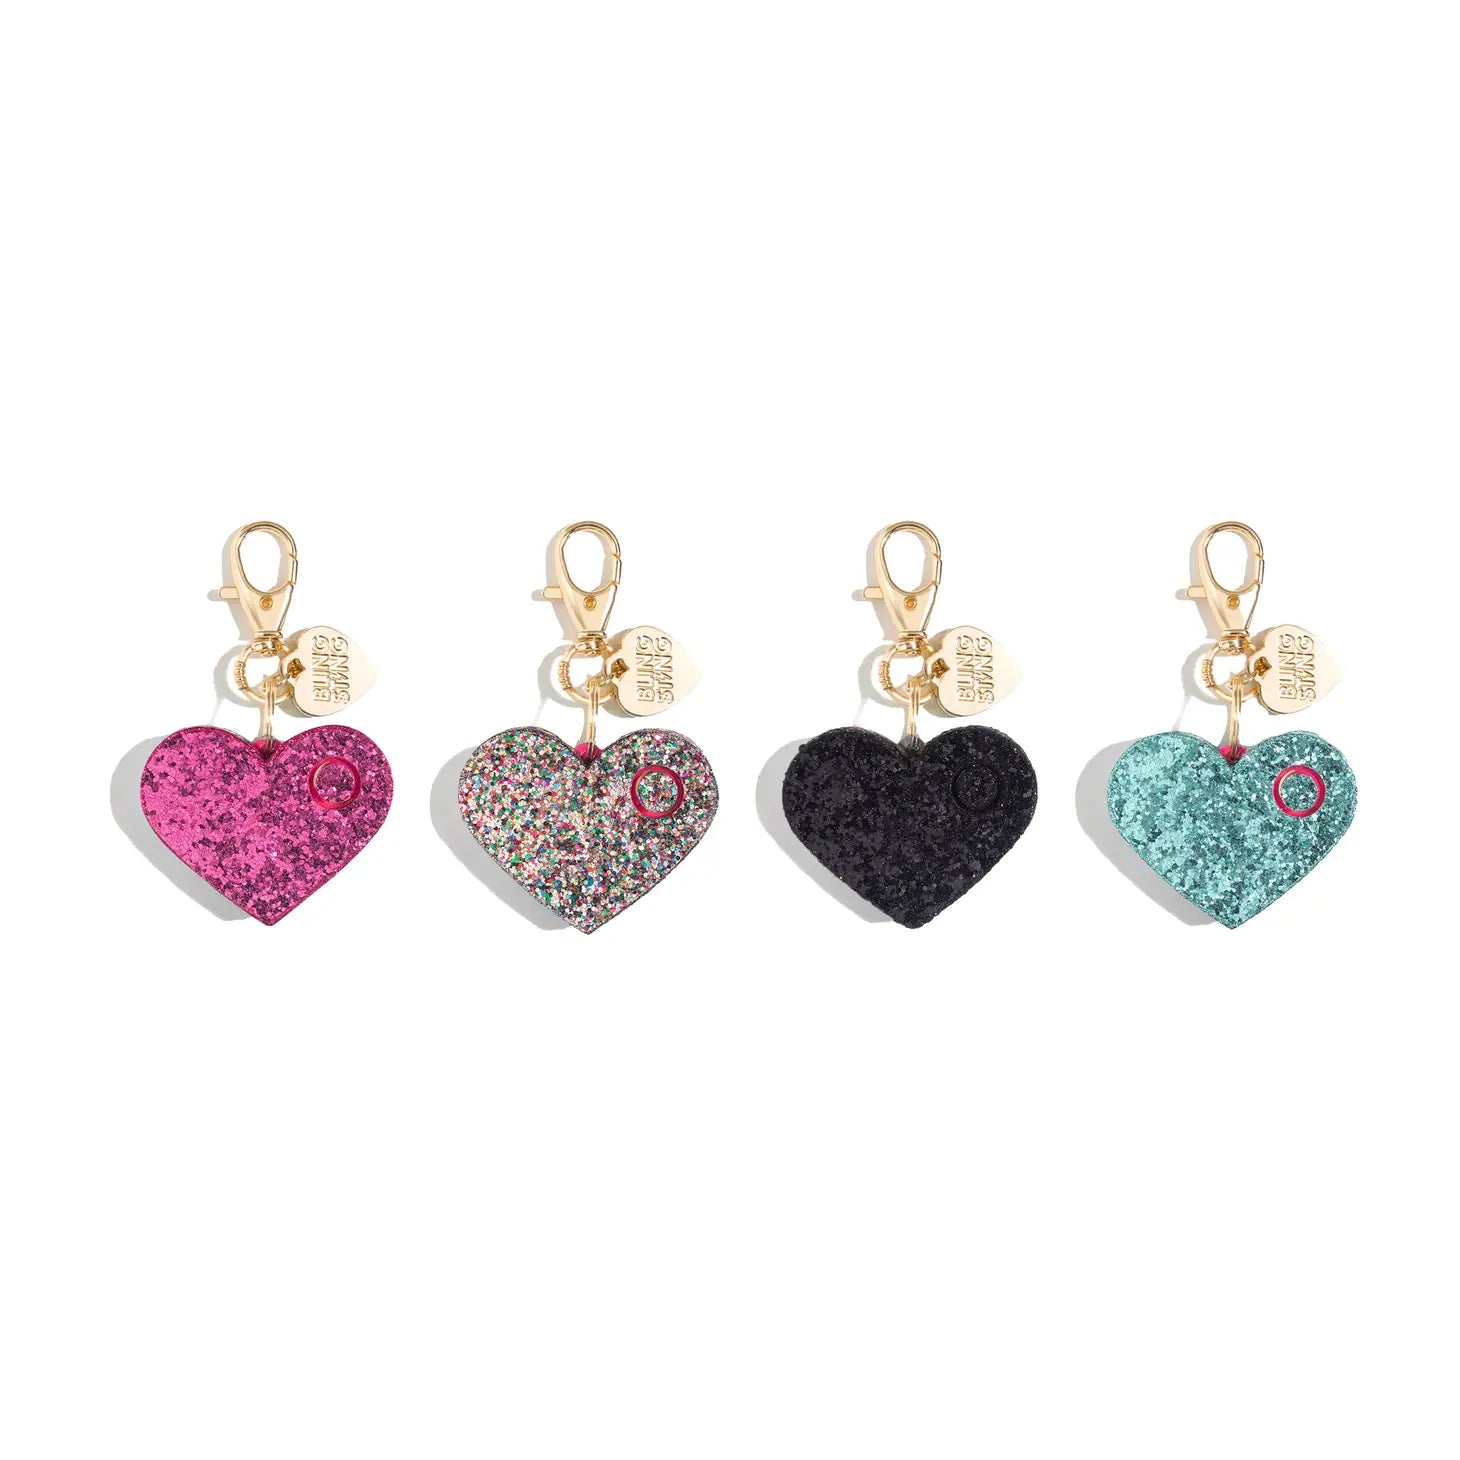 Glitter Heart Safety Alarms